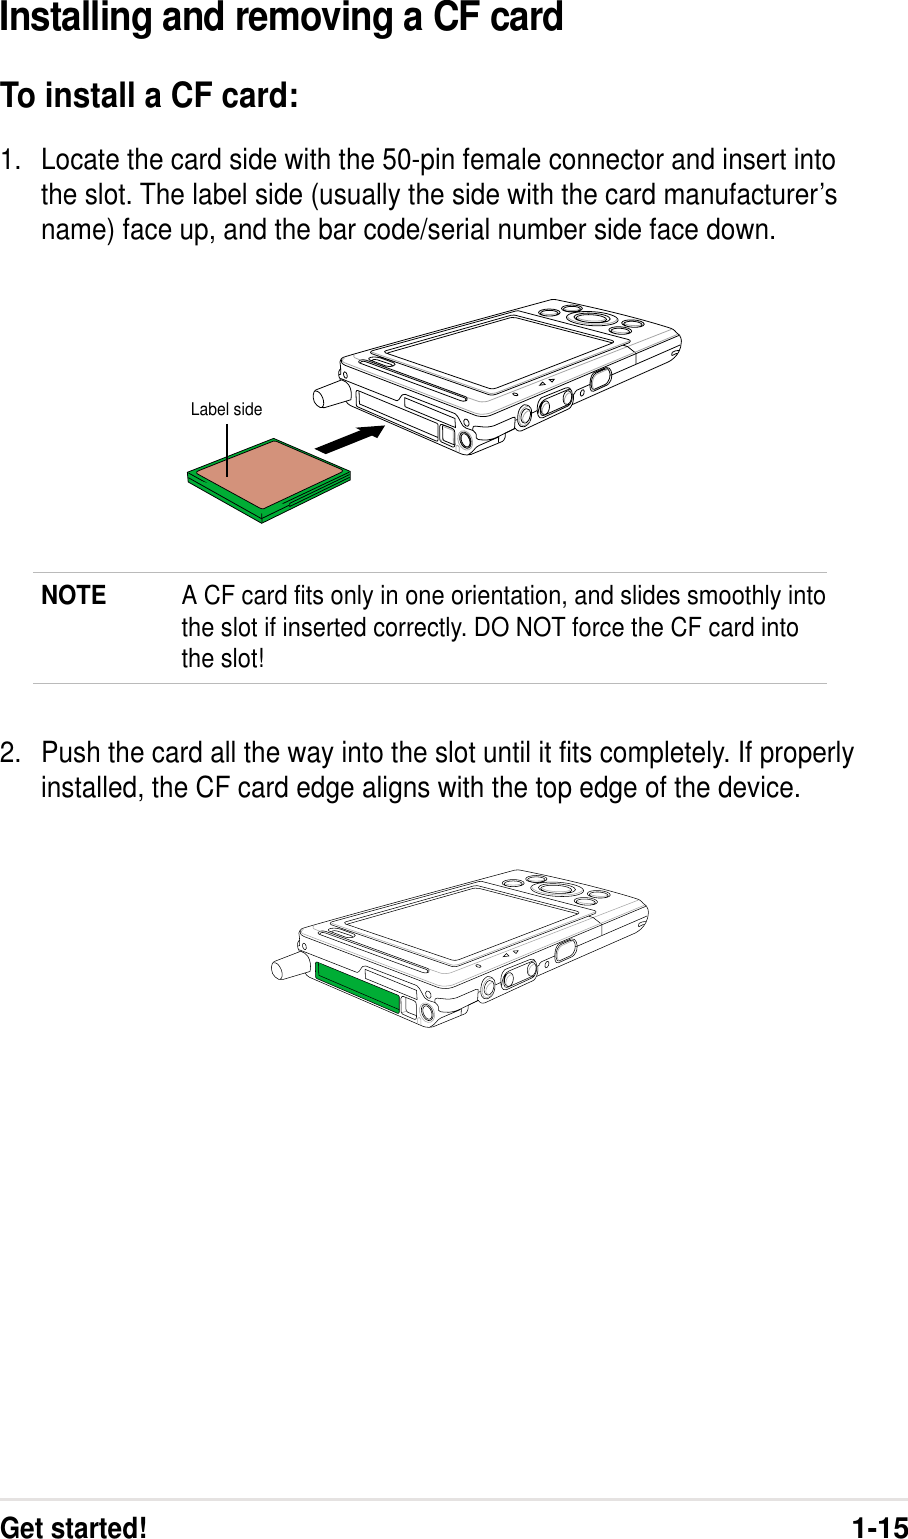 Get started!1-15NOTE A CF card fits only in one orientation, and slides smoothly intothe slot if inserted correctly. DO NOT force the CF card intothe slot!Label sideInstalling and removing a CF cardTo install a CF card:1. Locate the card side with the 50-pin female connector and insert intothe slot. The label side (usually the side with the card manufacturer’sname) face up, and the bar code/serial number side face down.2. Push the card all the way into the slot until it fits completely. If properlyinstalled, the CF card edge aligns with the top edge of the device.